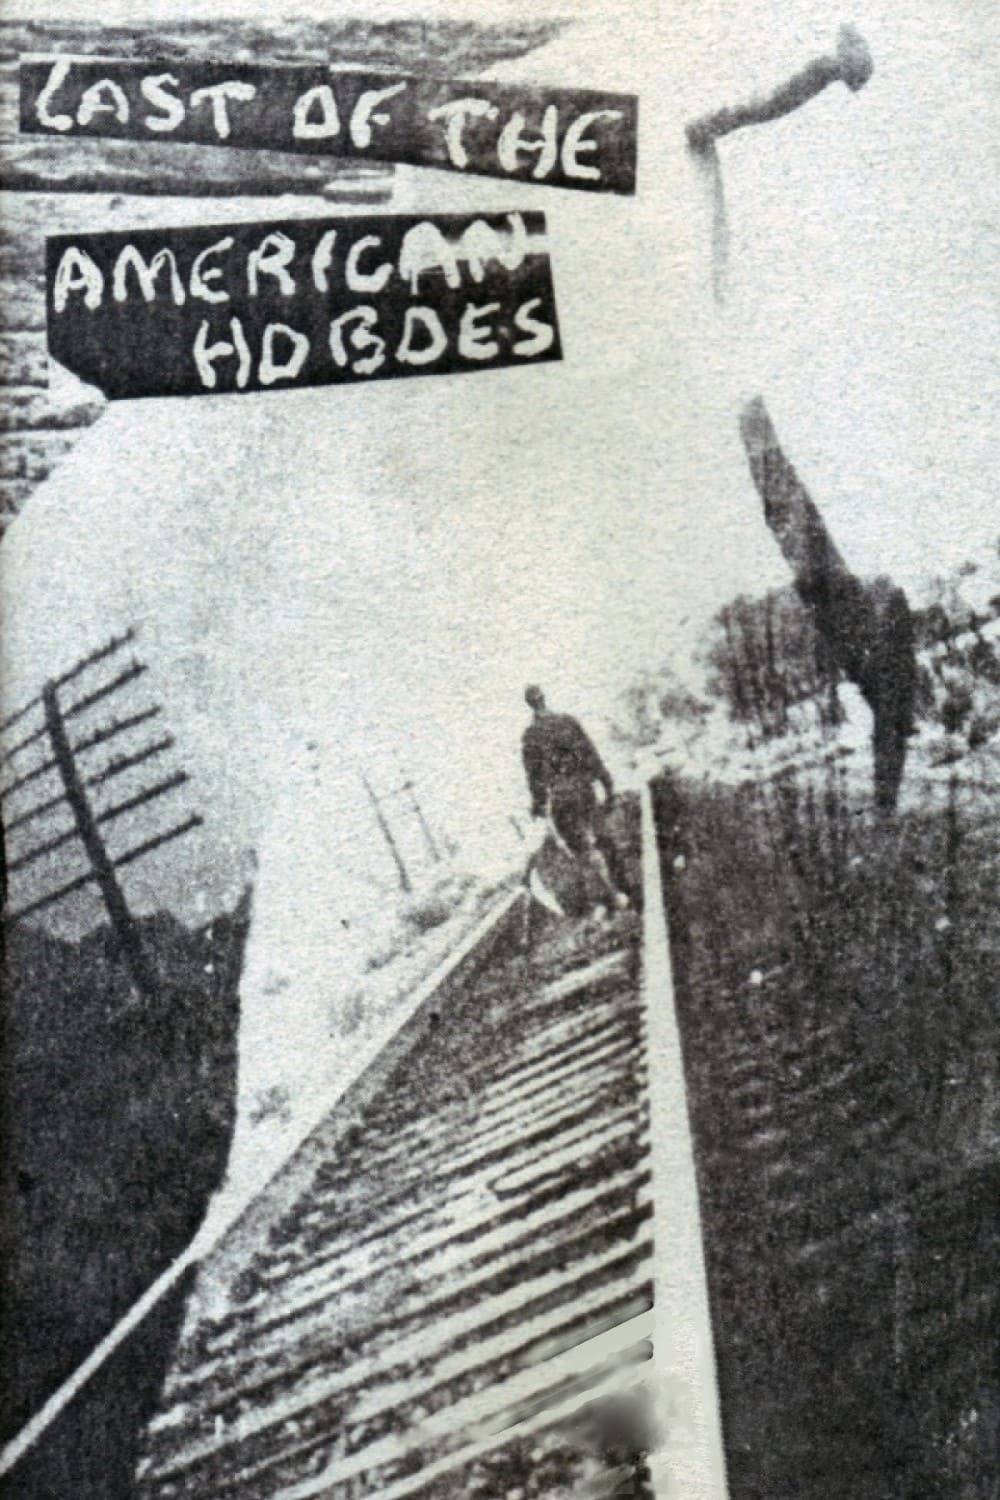 The Last of the American Hoboes (1967)